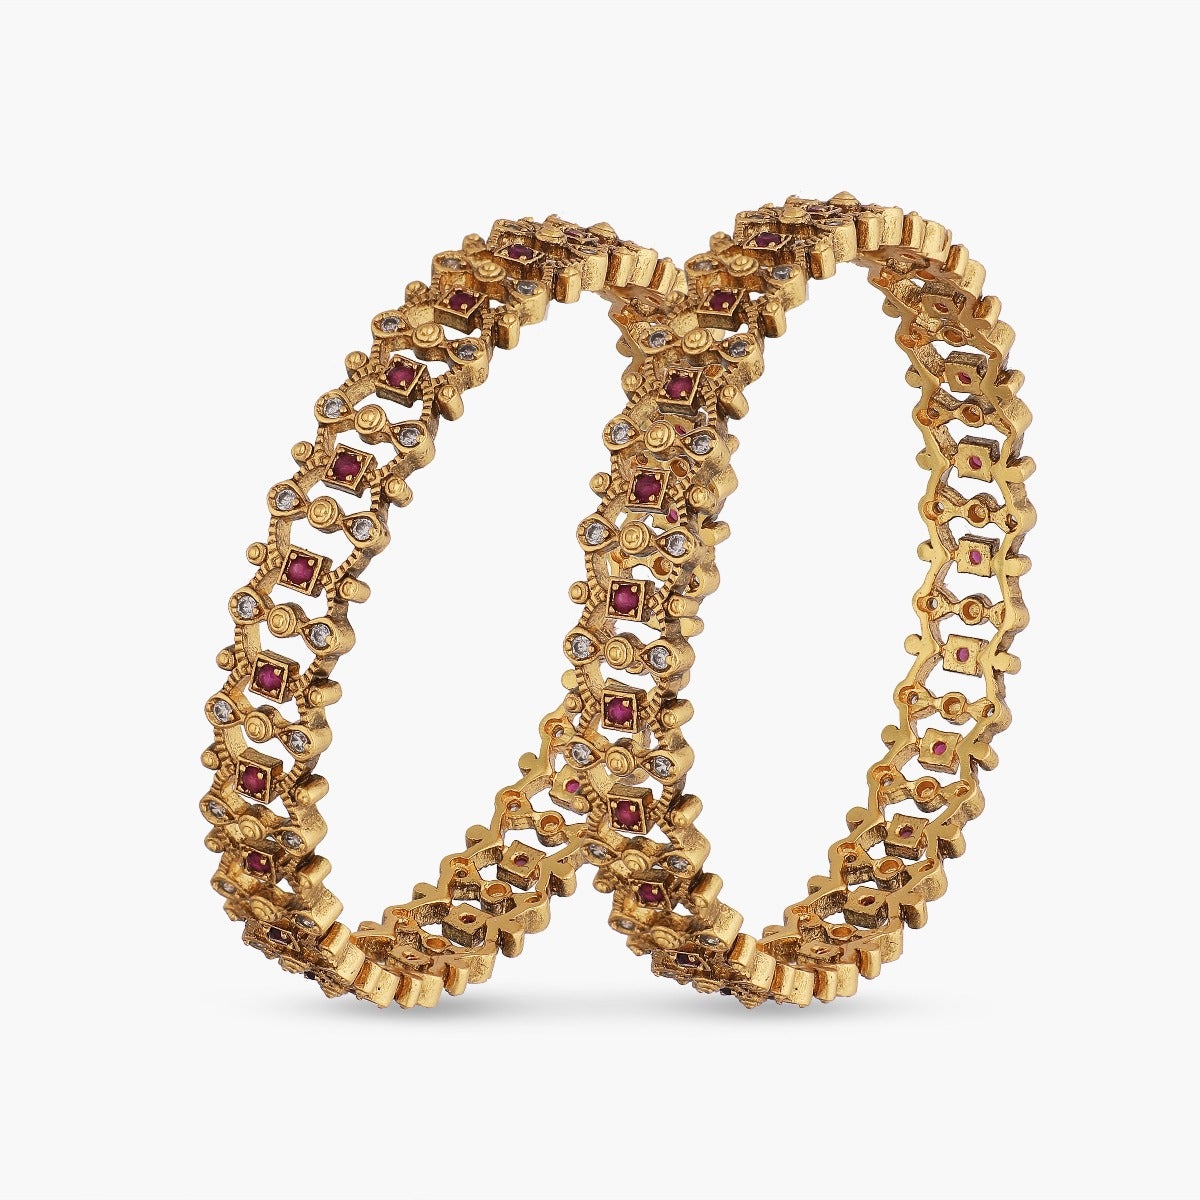 A picture of Indian artificial jewelry: a pair of gold-colored bangles with red and Cubic zirconia stones on a white background.